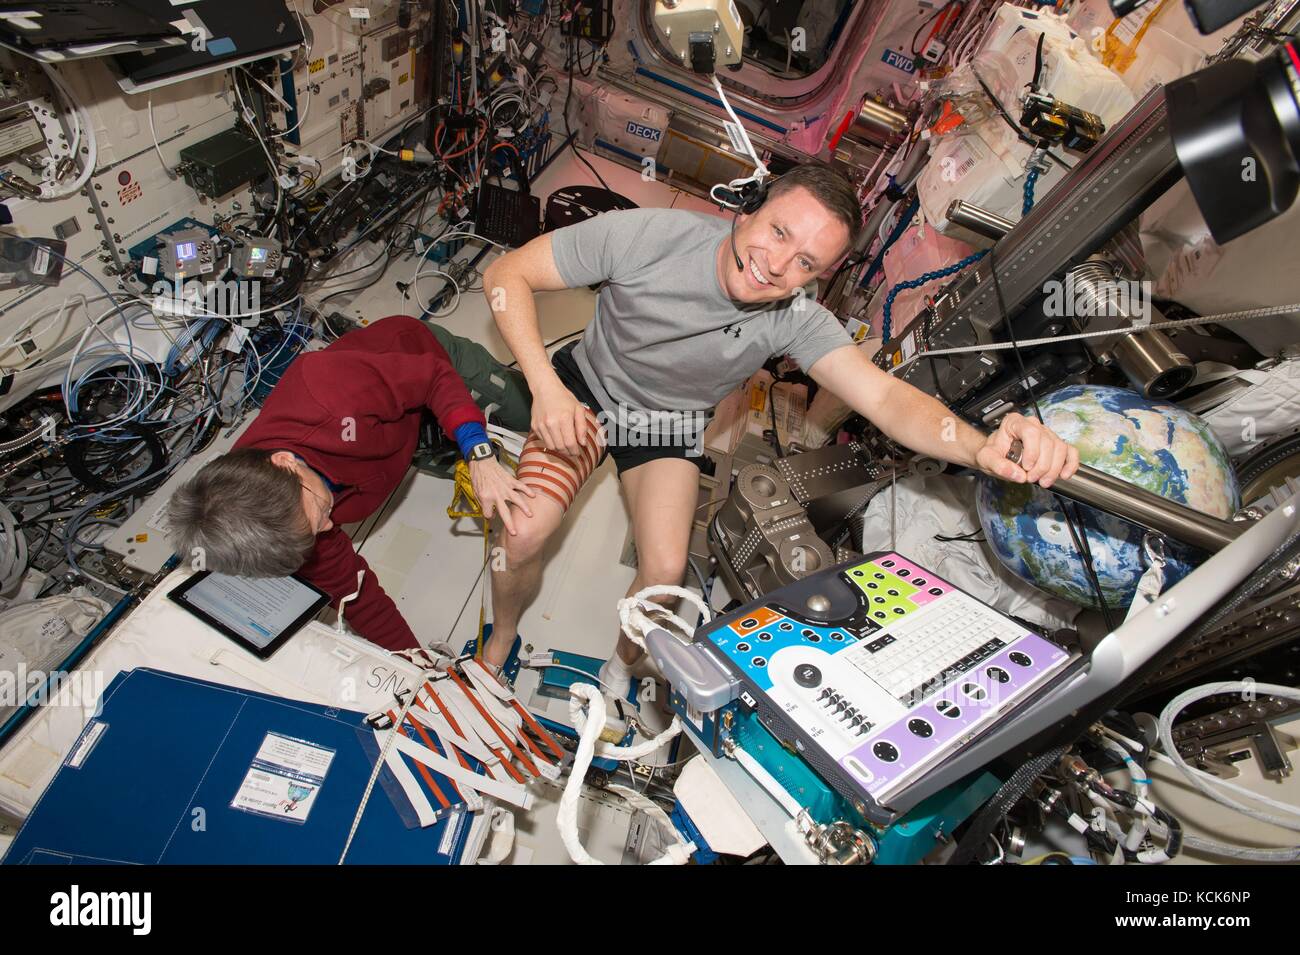 NASA International Space Station Expedition 51 prime crew members American astronauts Peggy Whitson (left) and Jack Fischer prepare for the Integrated Resistance and Aerobic Training Study experiment in the Columbus European Laboratory module May 3, 2017 in Earth orbit.  (photo by NASA Photo  via Planetpix) Stock Photo